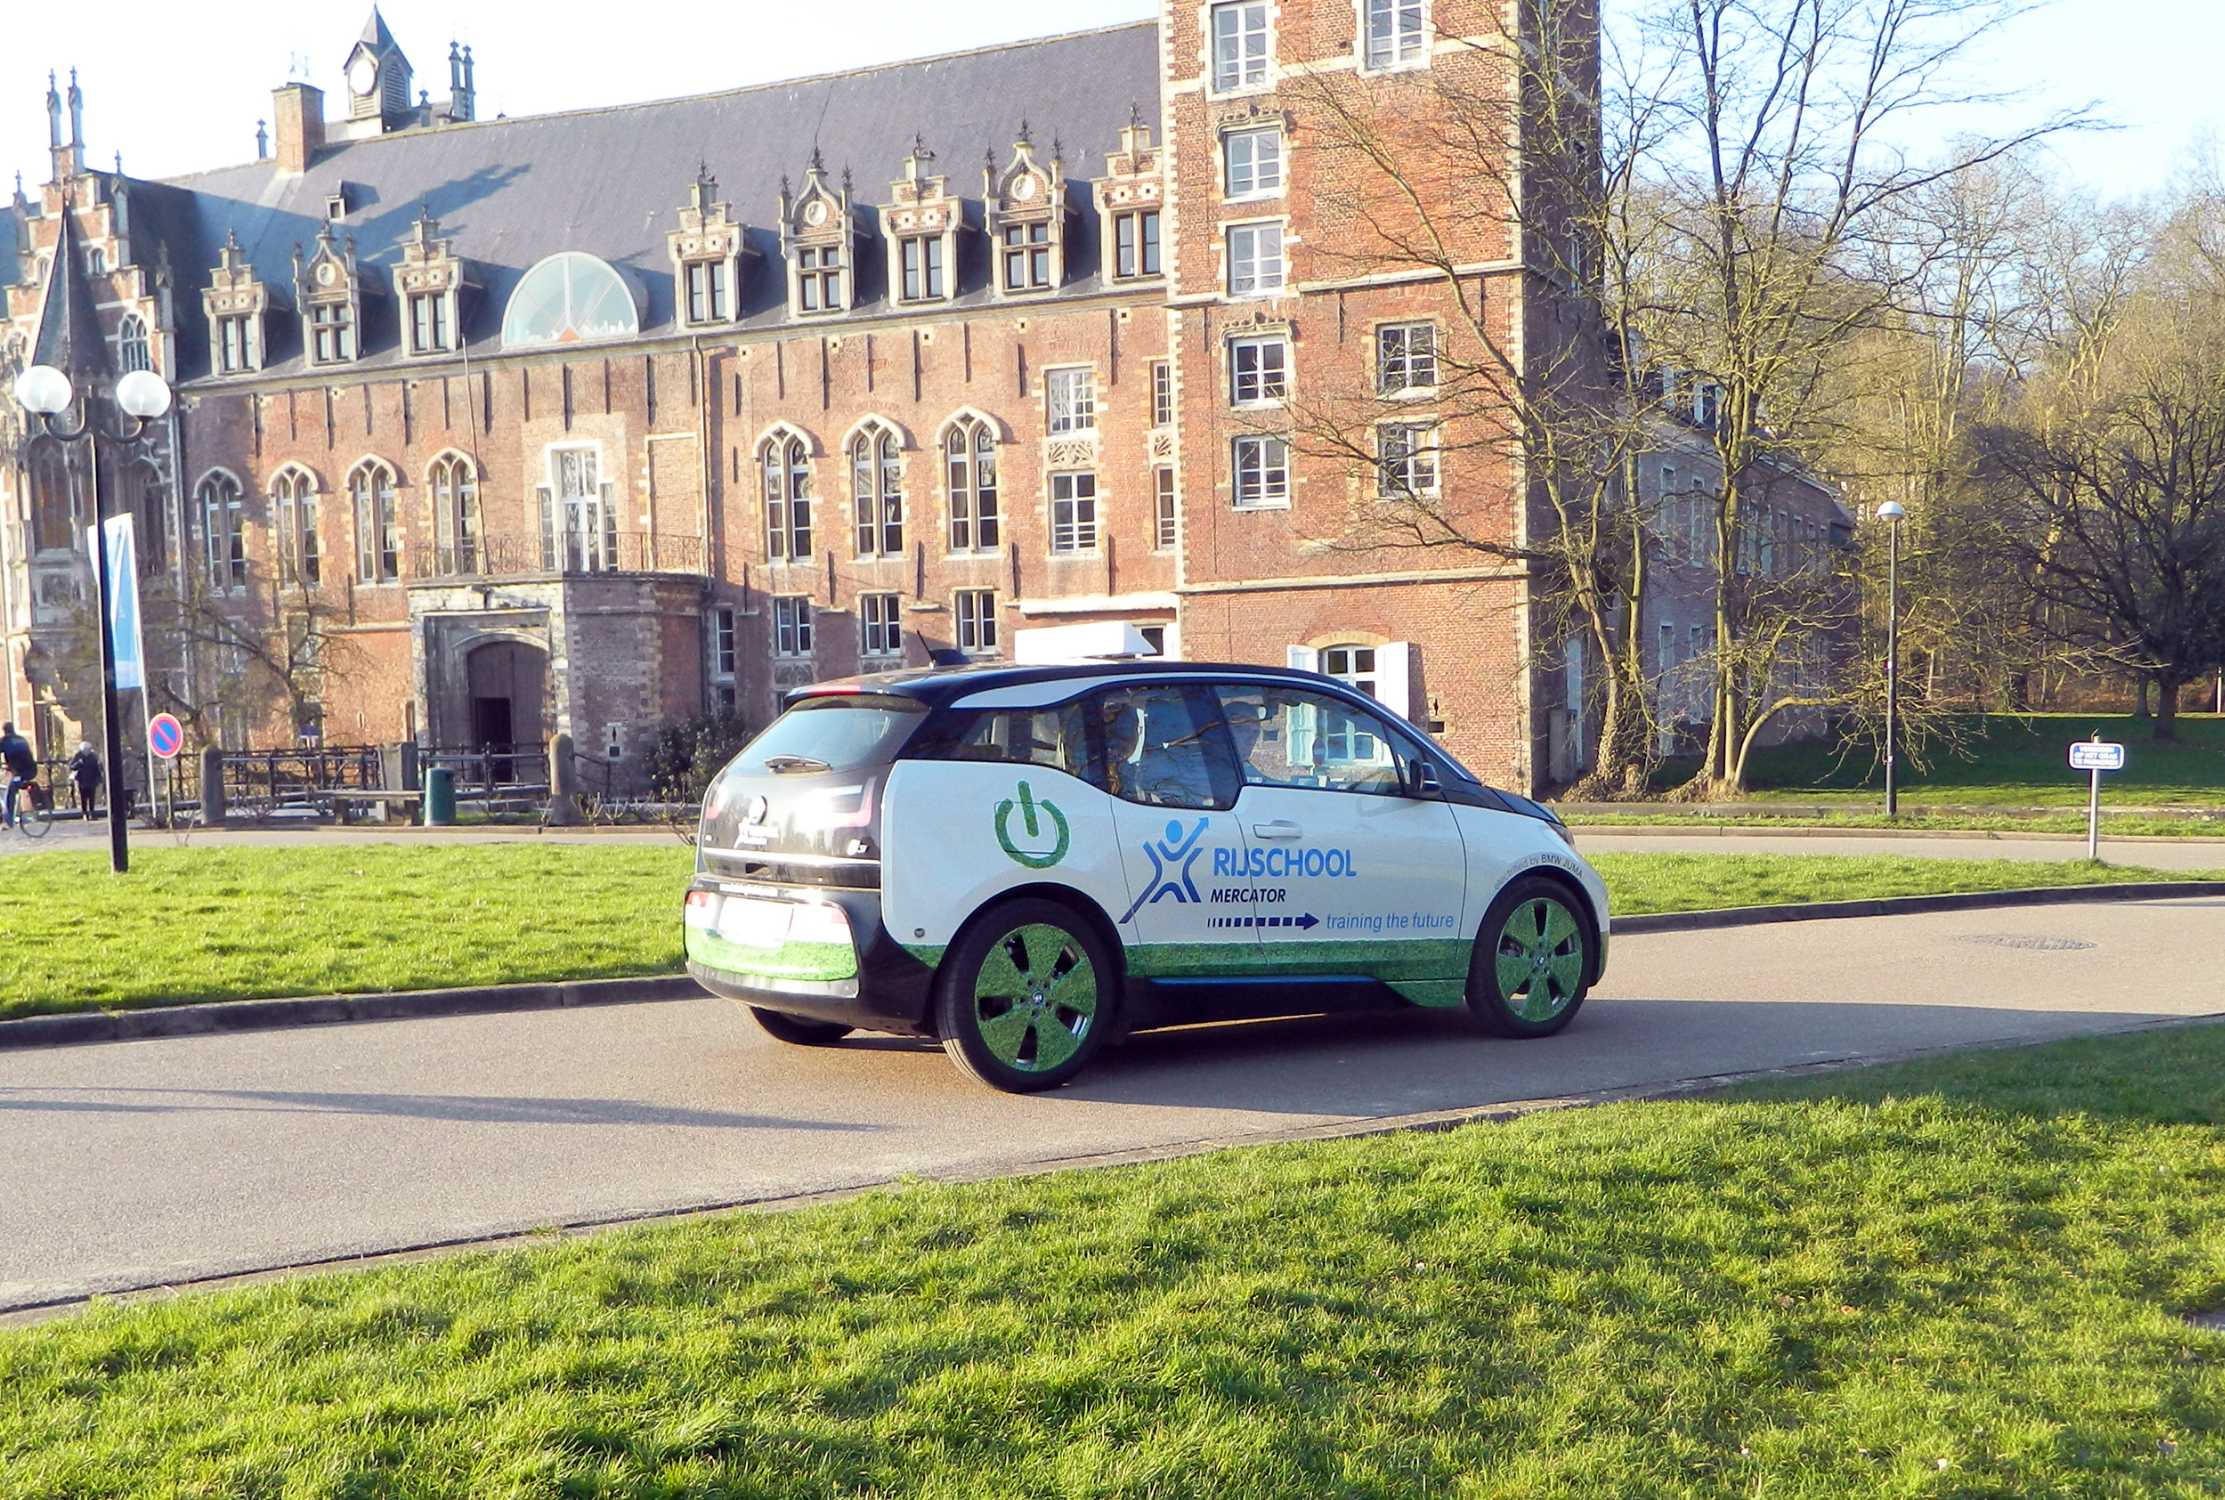 Rijschool Mercator has transformed a BMW i3 into a training car for driving lessons.(02/2018)